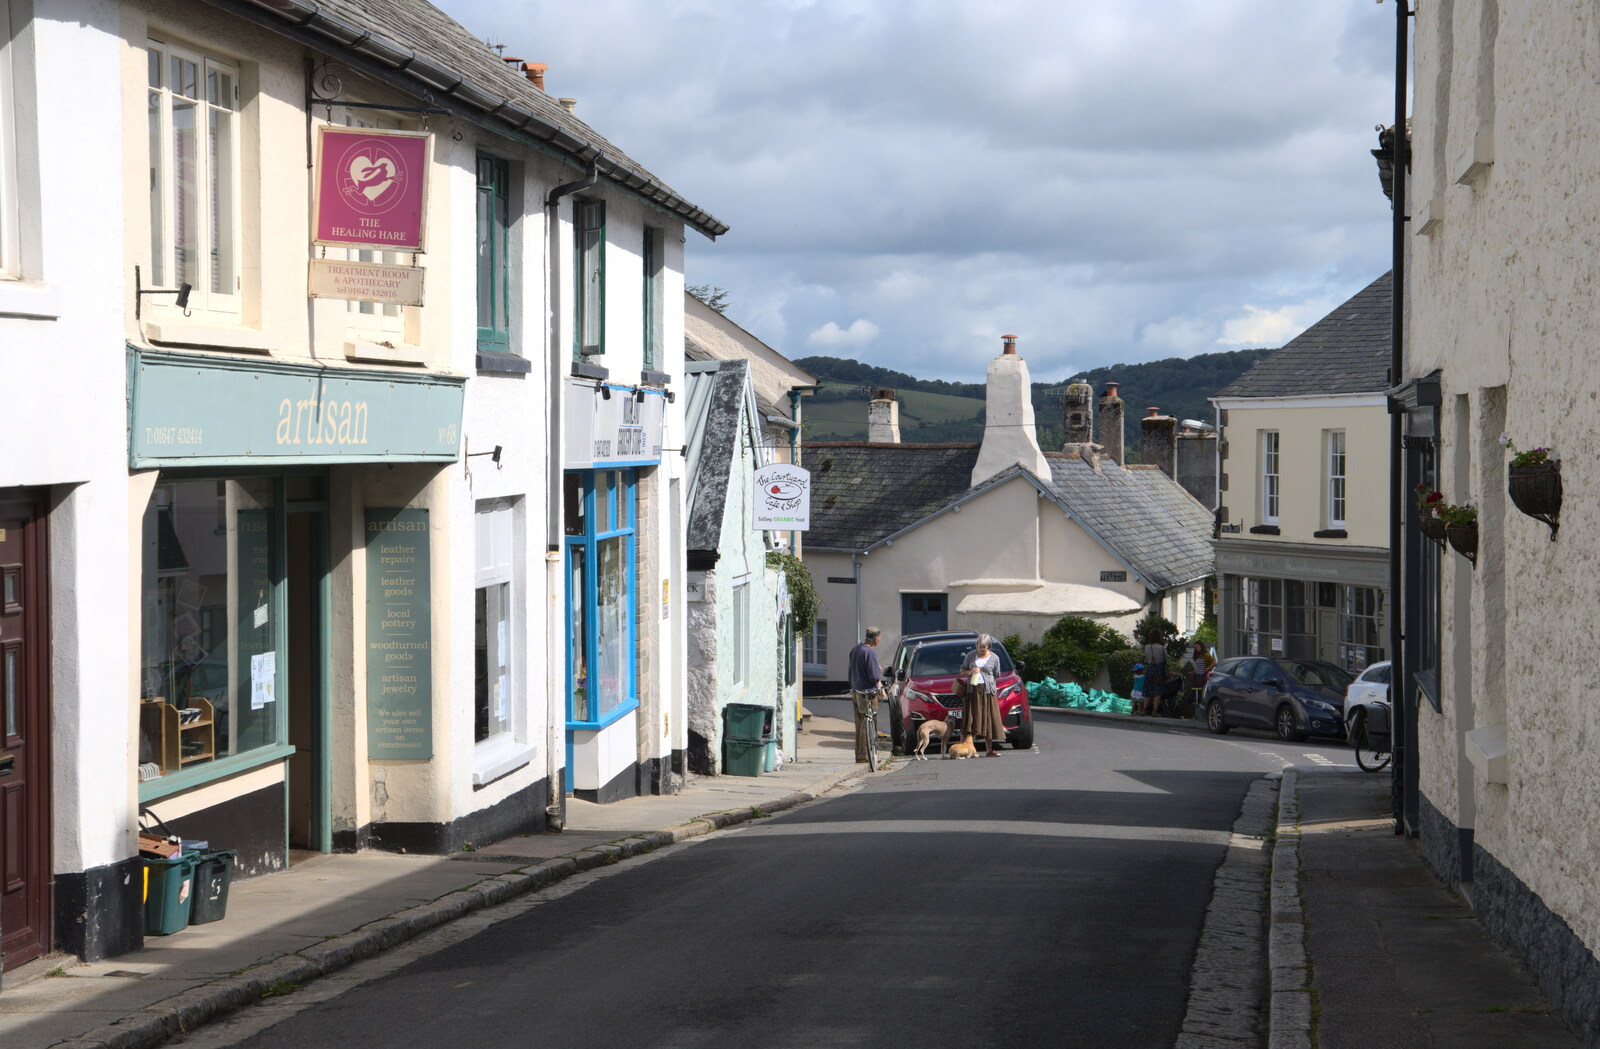 The main road out of Chagford from A Game of Cricket, and a Walk Around Chagford, Devon - 23rd August 2020